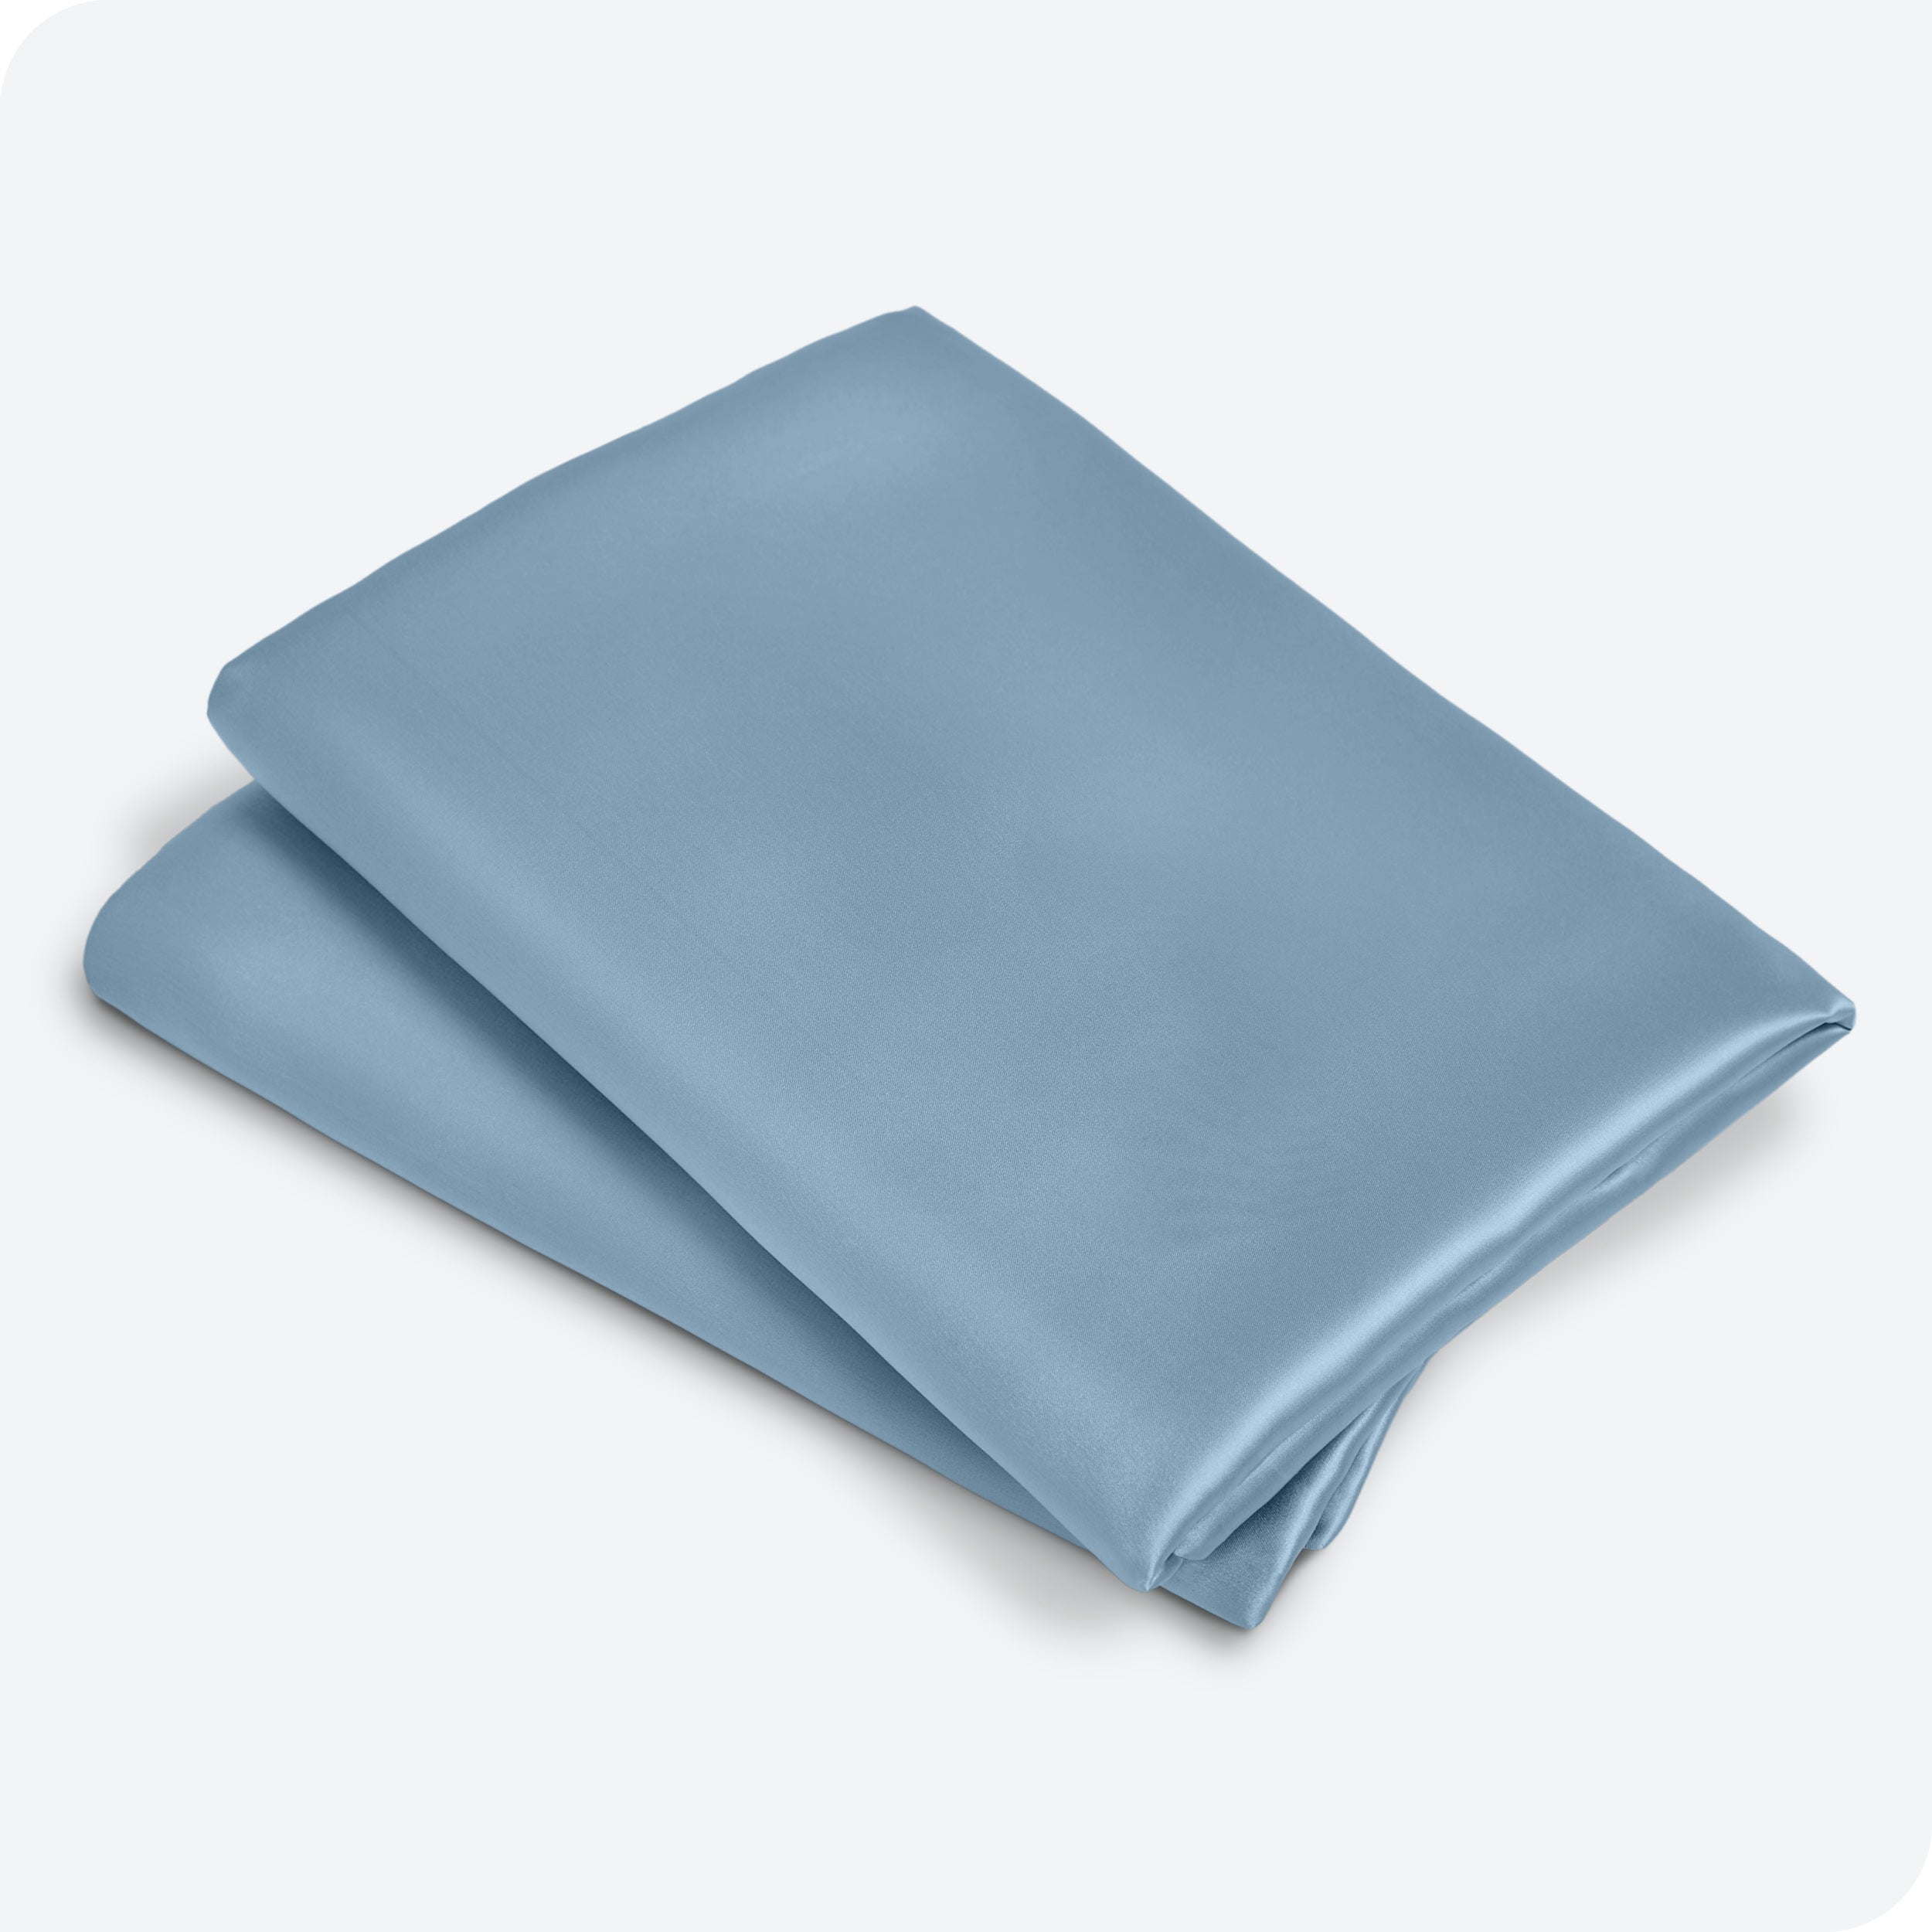 Two satin pillowcases folded and stacked